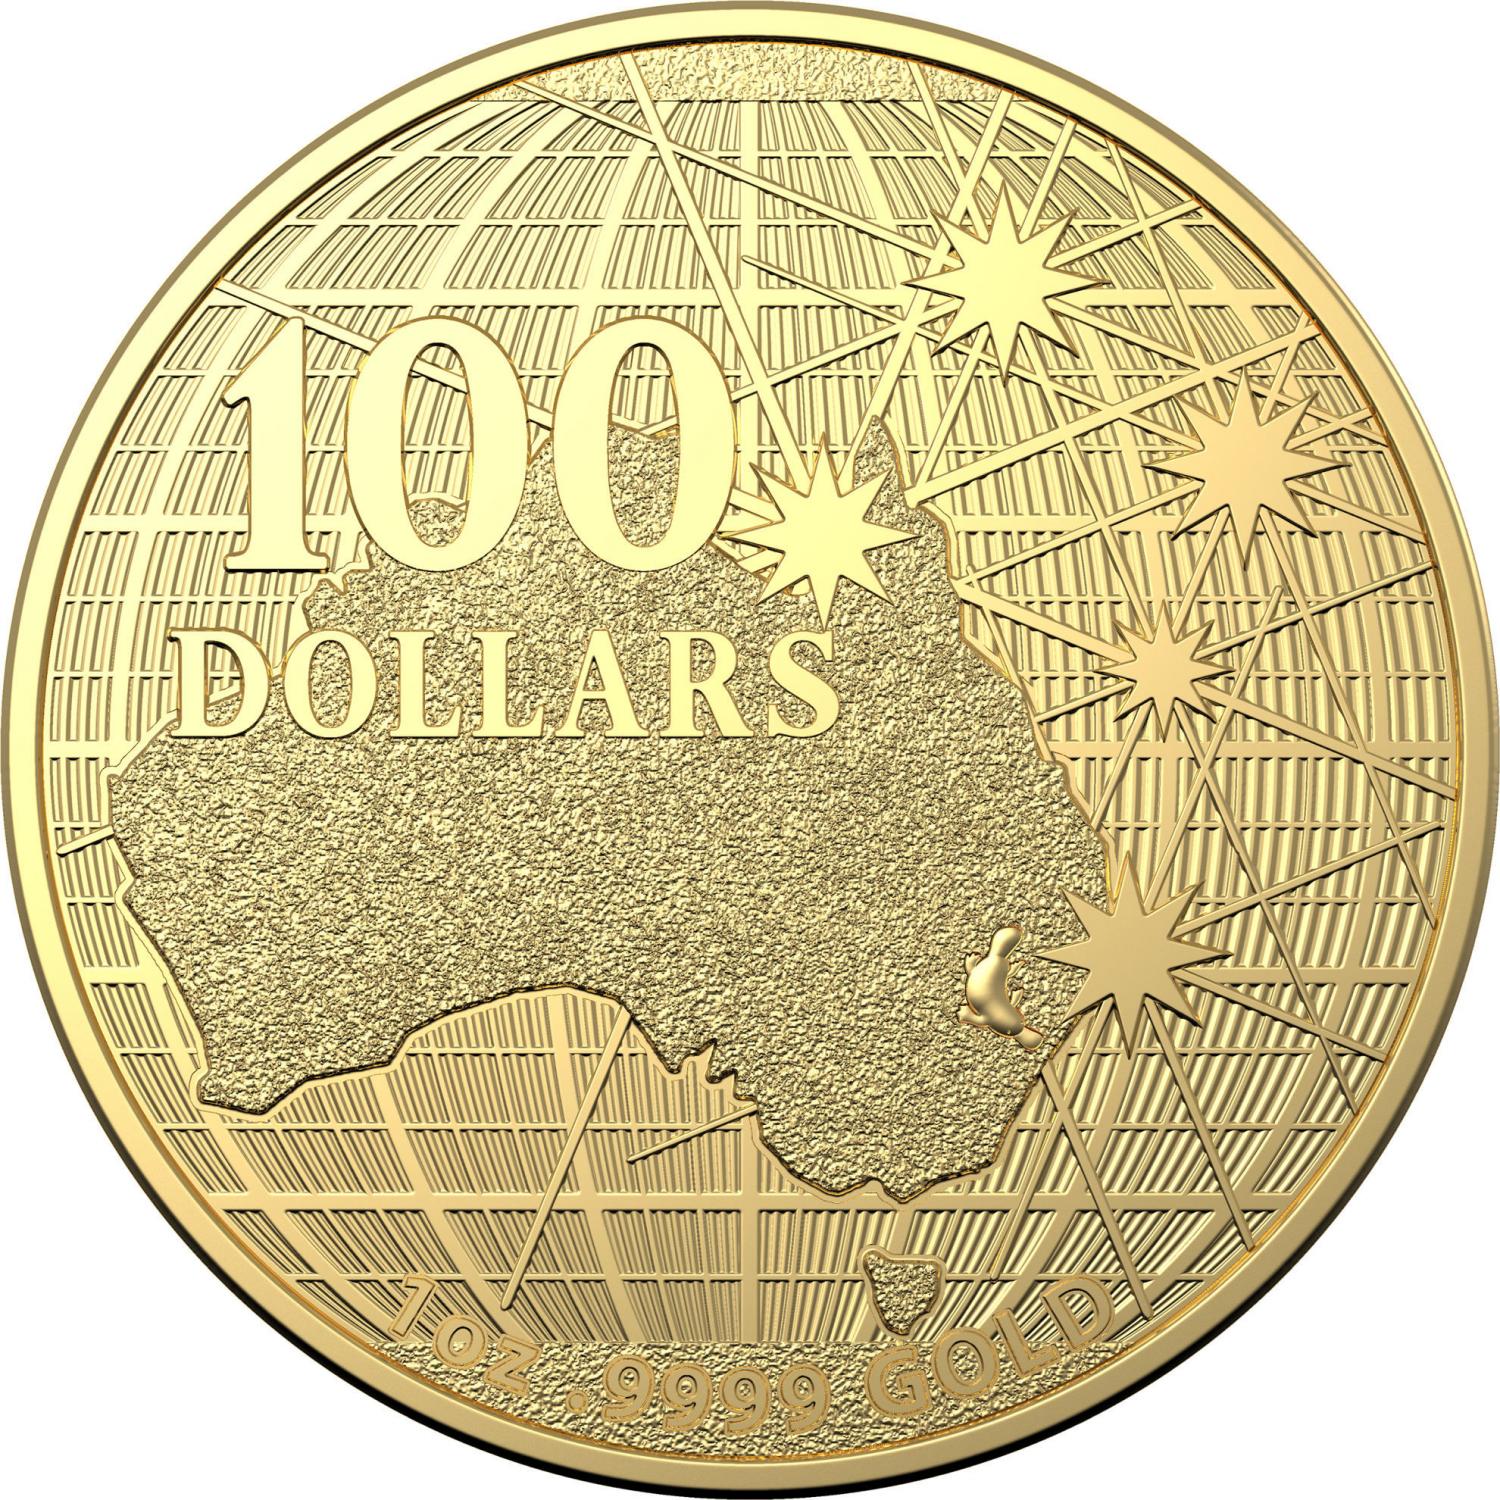 Thumbnail for 2021 $100 Beneath The Southern Skies Gold 99.9% Au 1oz Brilliant UNC Coin in Capsule - Platypus Privy